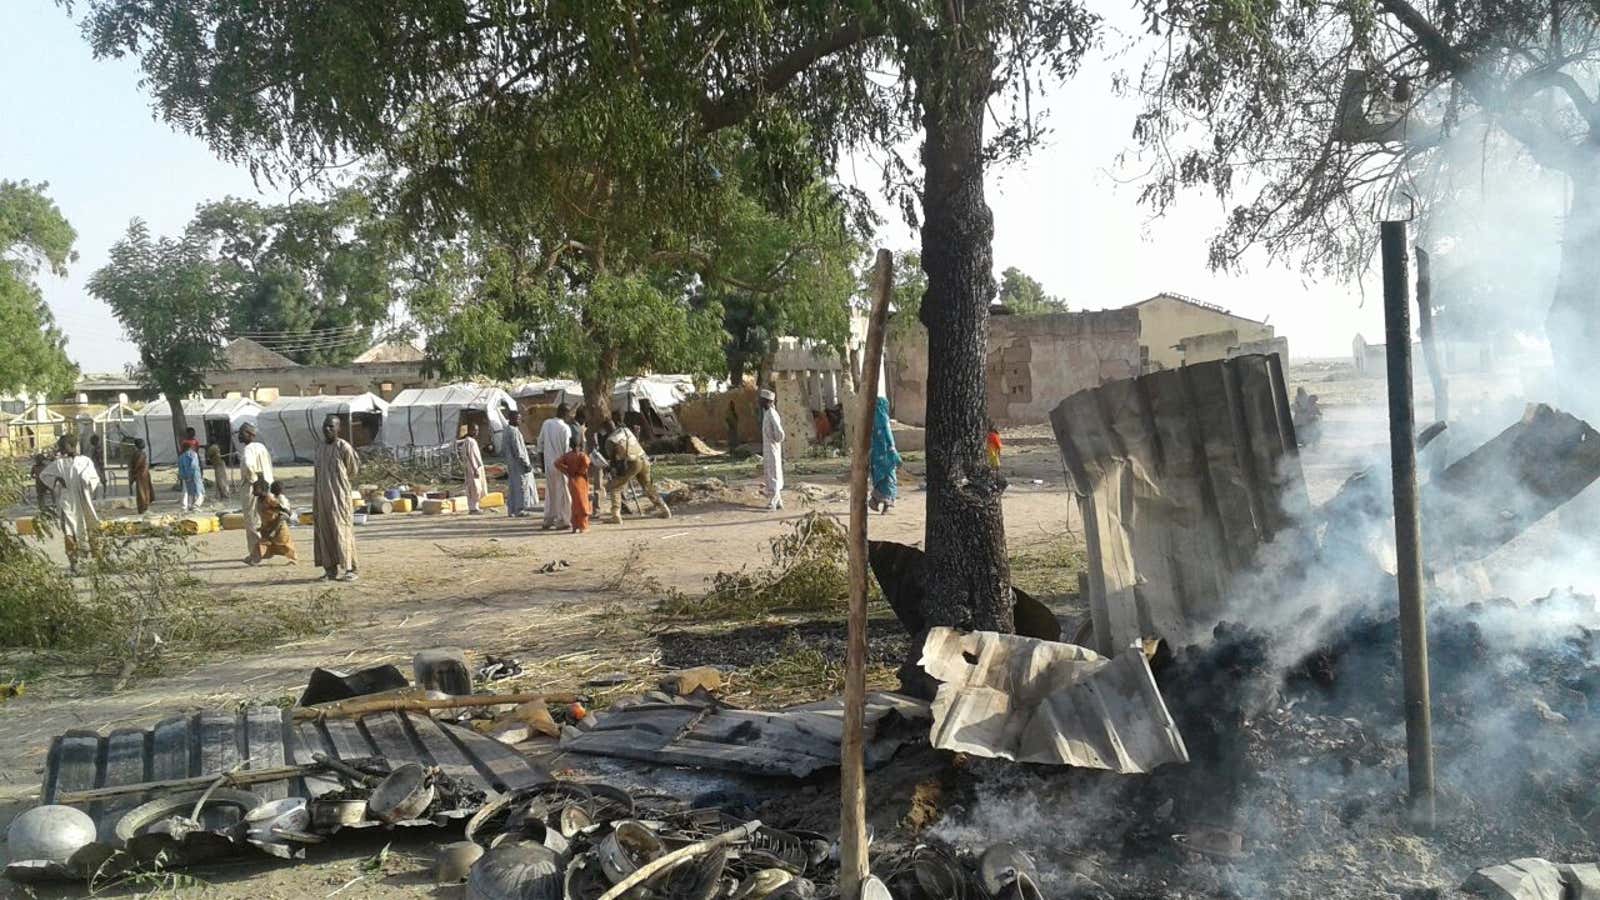 More than 50 killed and 120 injured after a bomb landed on this refugee camp in Nigeria.